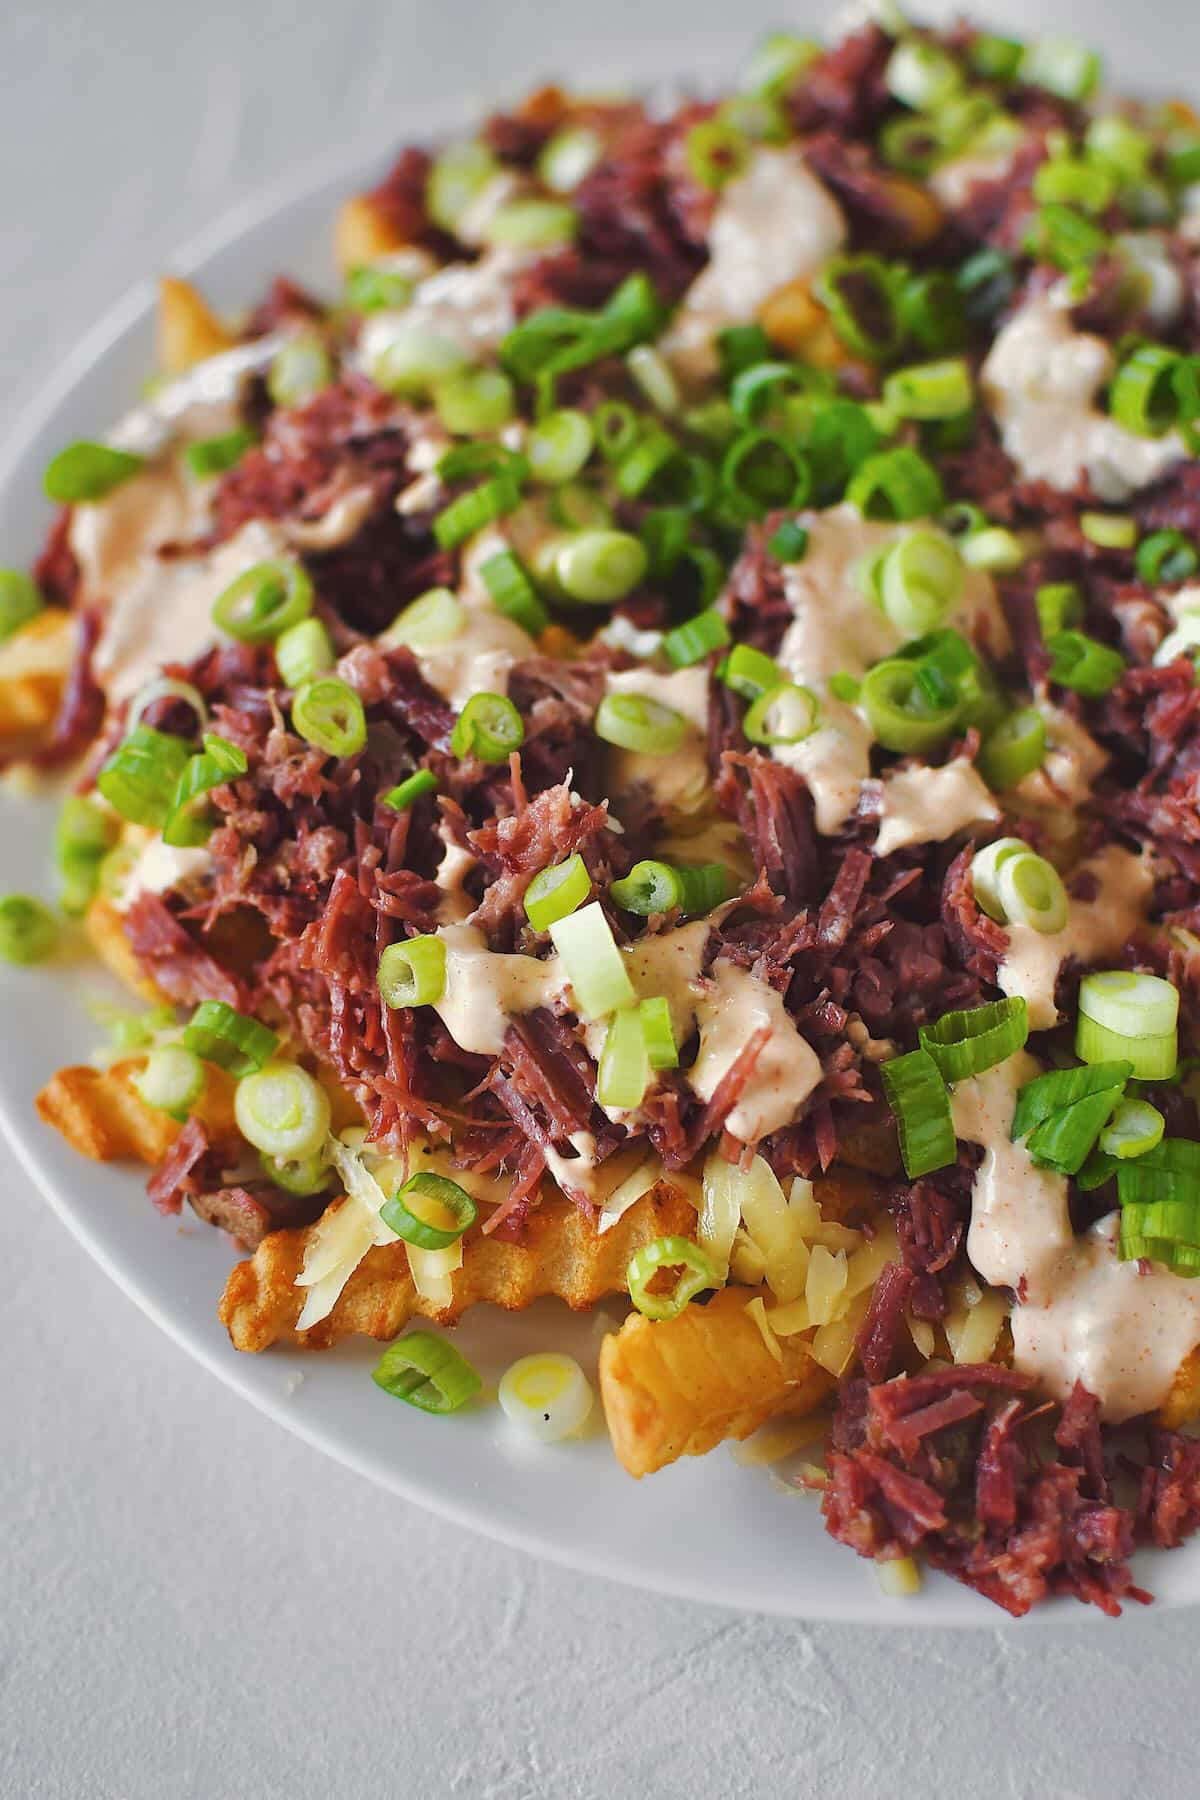 Finished Irish Nachos with white cheddar, corned beef, remoulade, and green onions on top of crispy crinkle french fries.